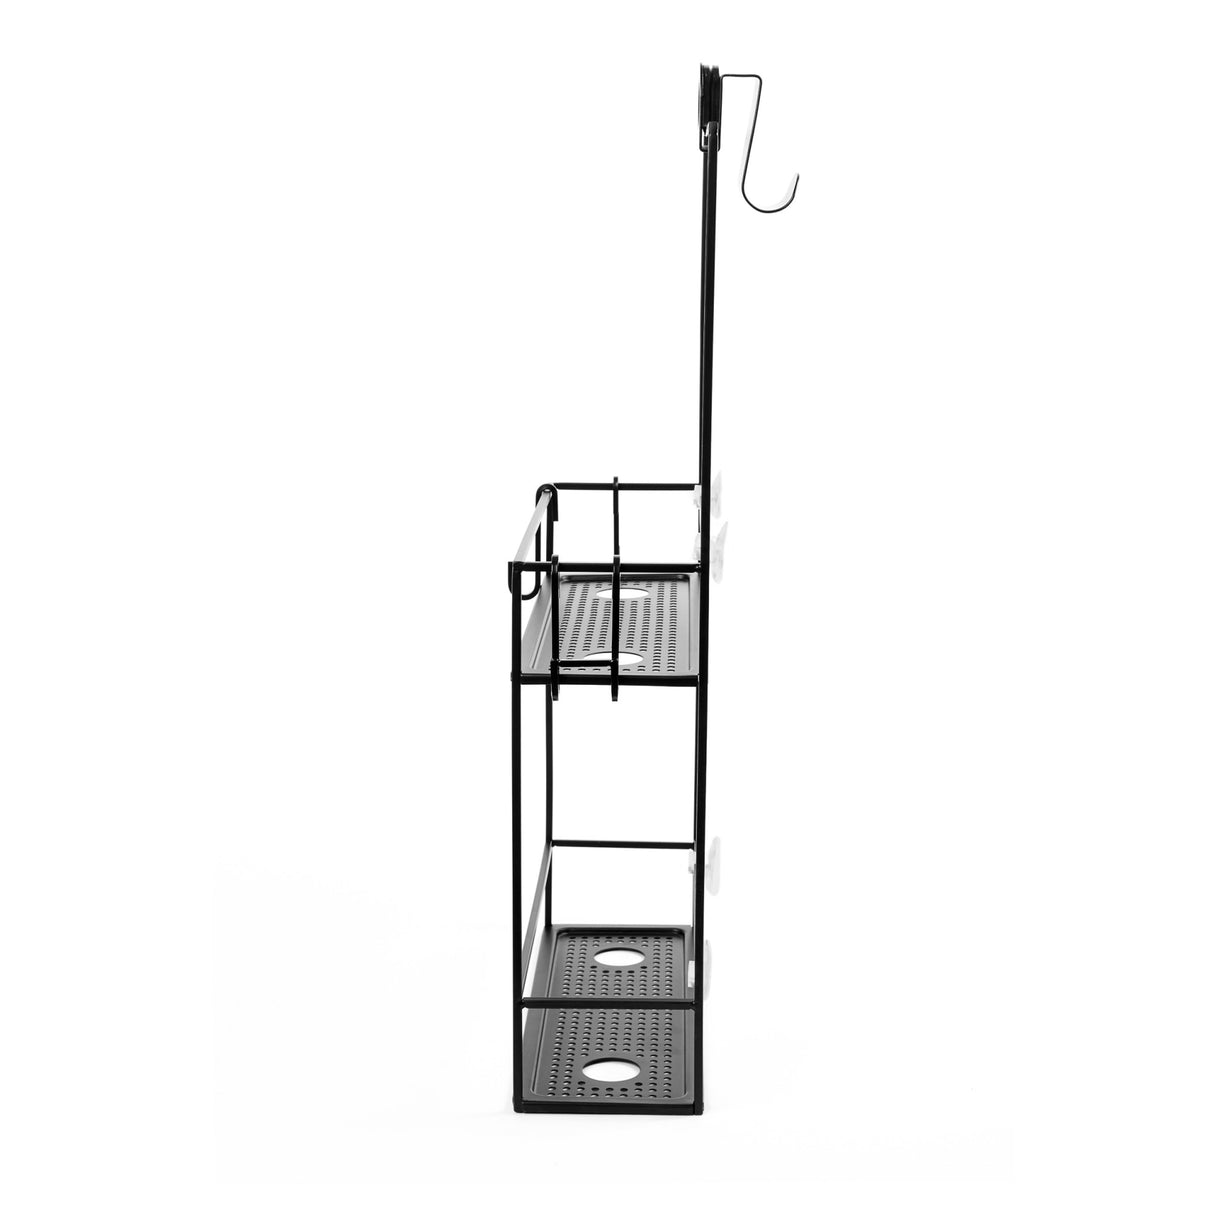 Adhesive Shower Caddy Shower Shelves Stainless Steel Self in Black, 3